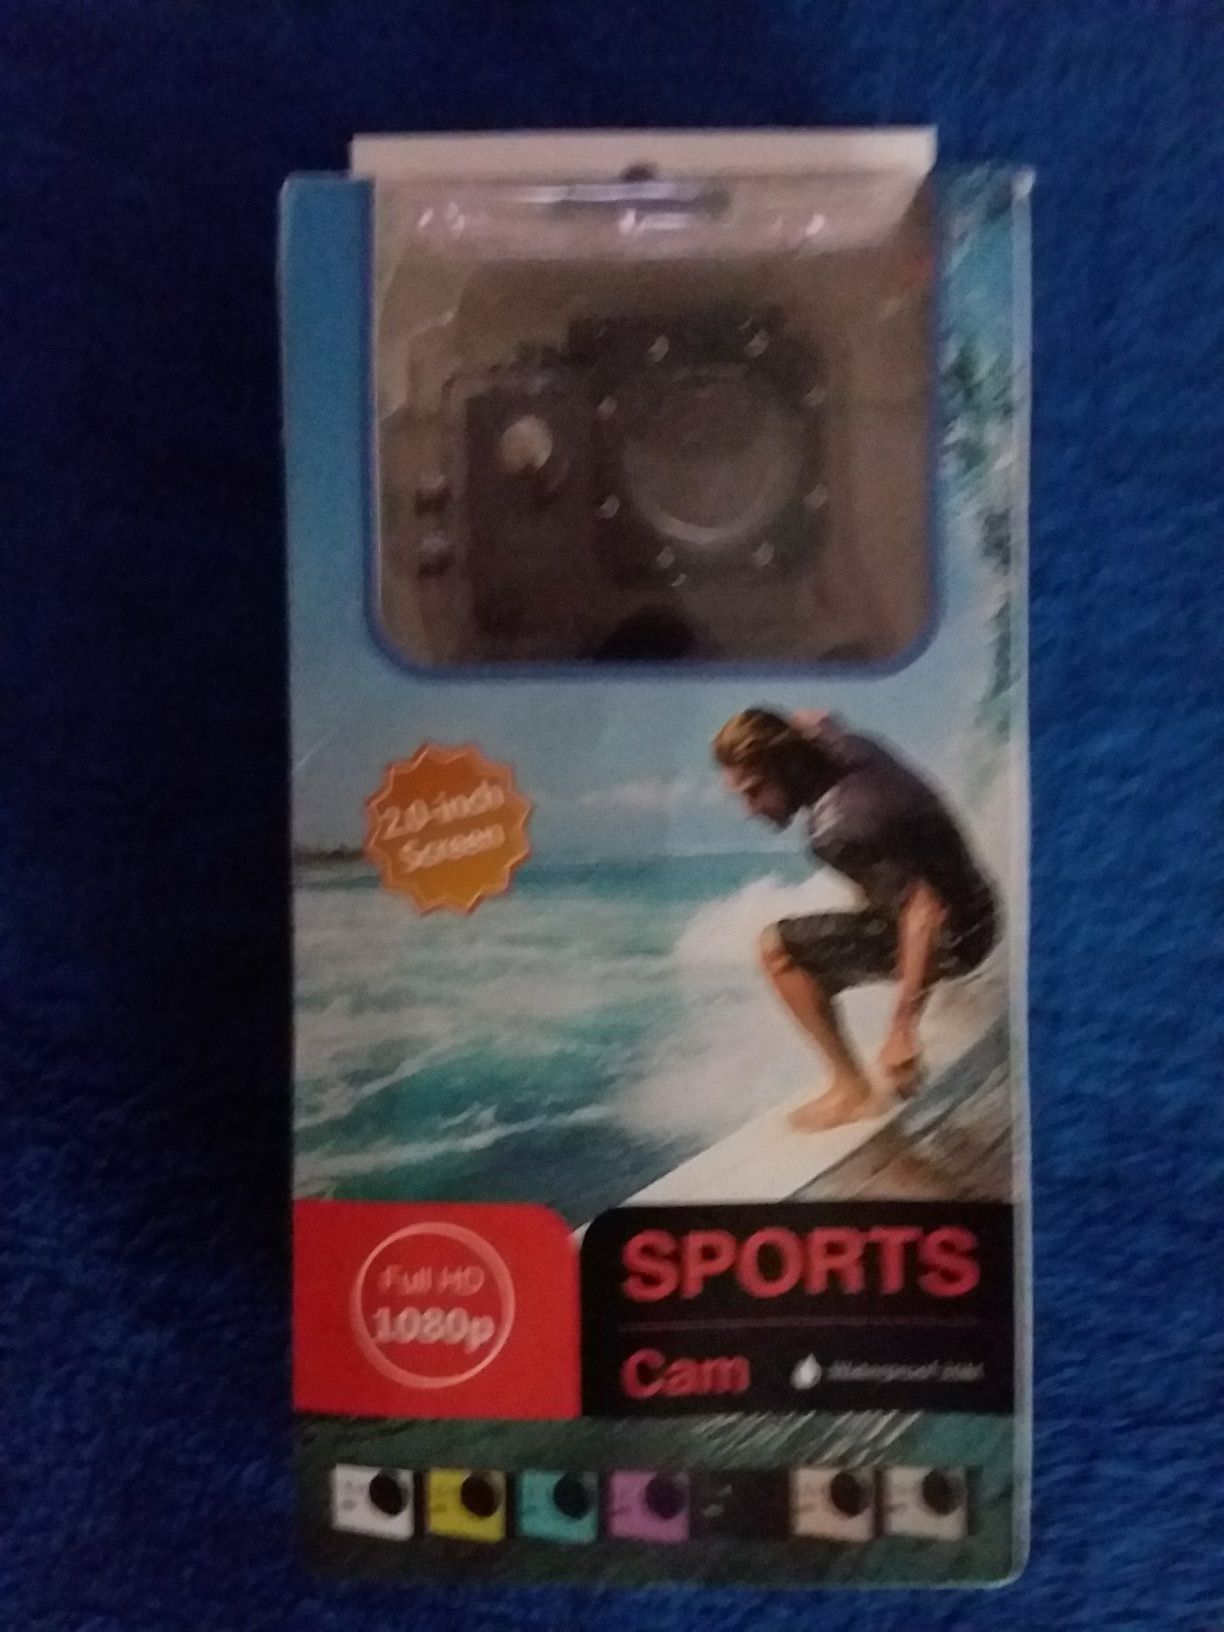 HD 1080 WATERPROOF ACTION CAMERA WITH TRIPOD INCLUDED.